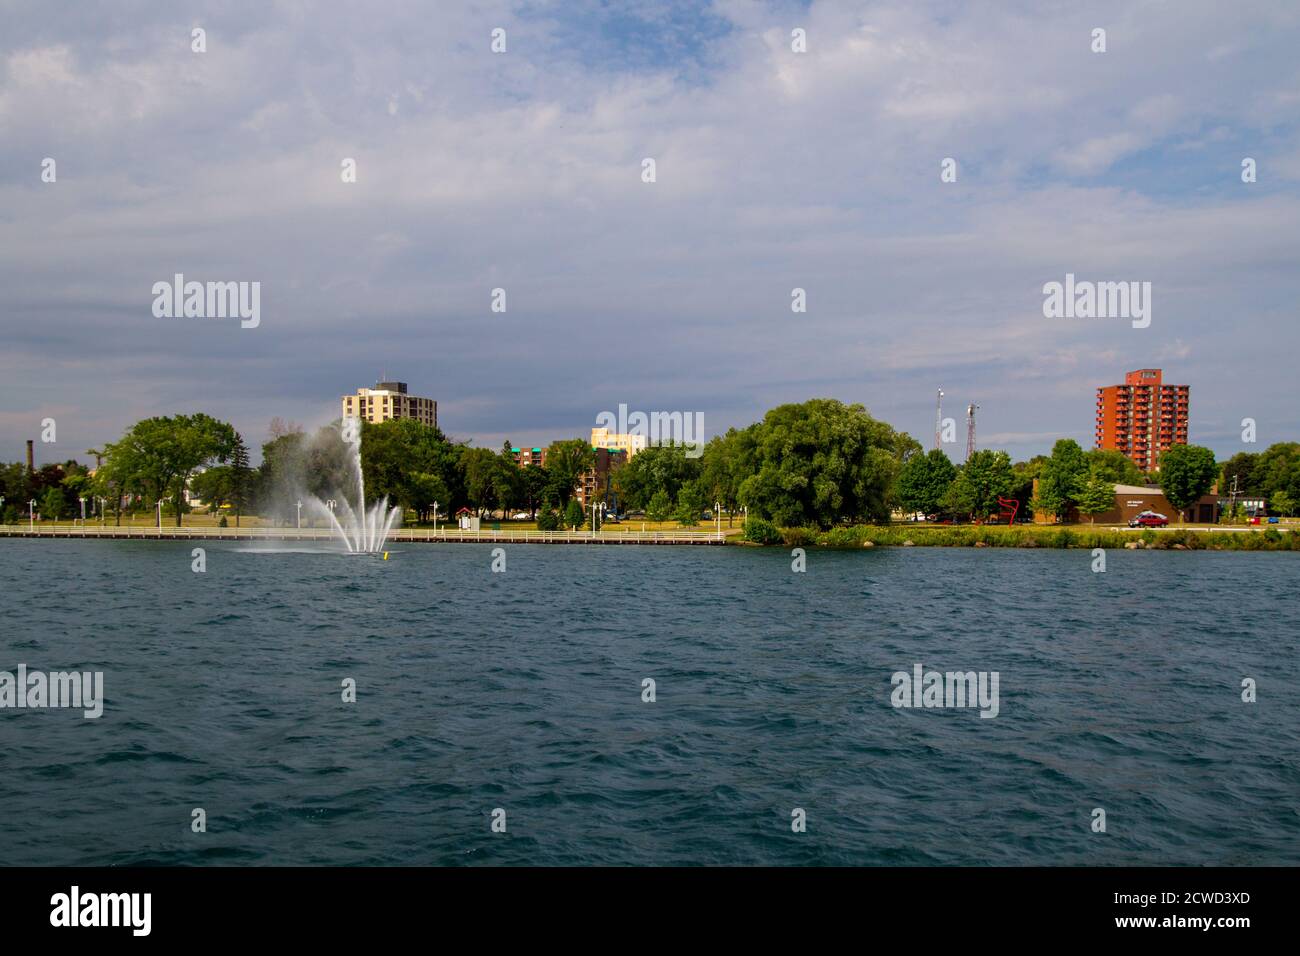 Sault Ste Marie Ontario skyline on the waterfront of the St Mary's River in Canada. Stock Photo